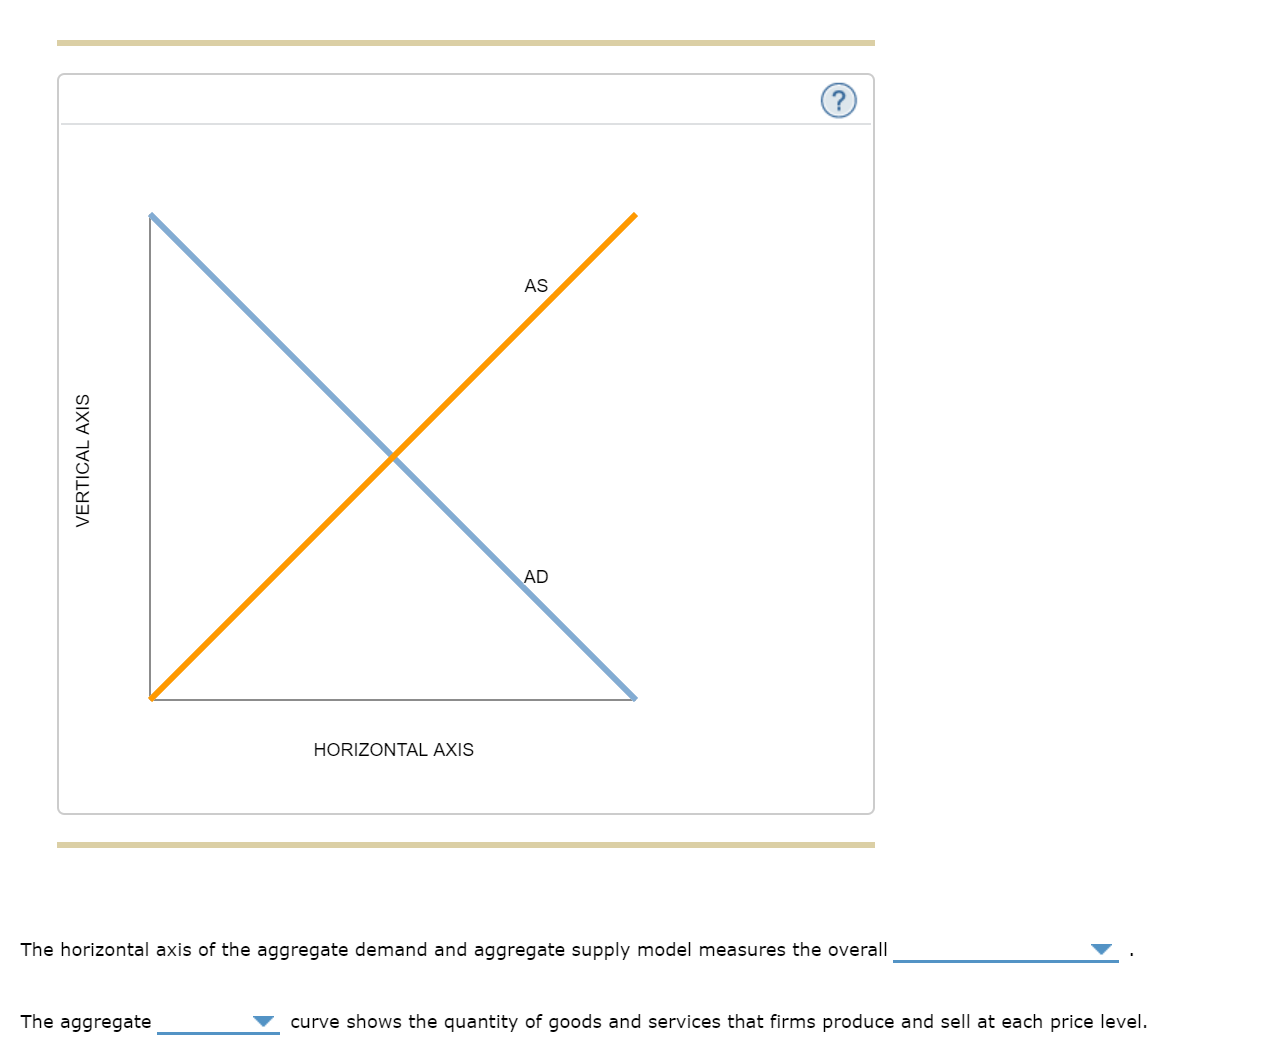 AS
AD
HORIZONTAL AXIS
The horizontal axis of the aggregate demand and aggregate supply model measures the overall
The aggregate
curve shows the quantity of goods and services that firms produce and sell at each price level.
VERTICAL AXIS
